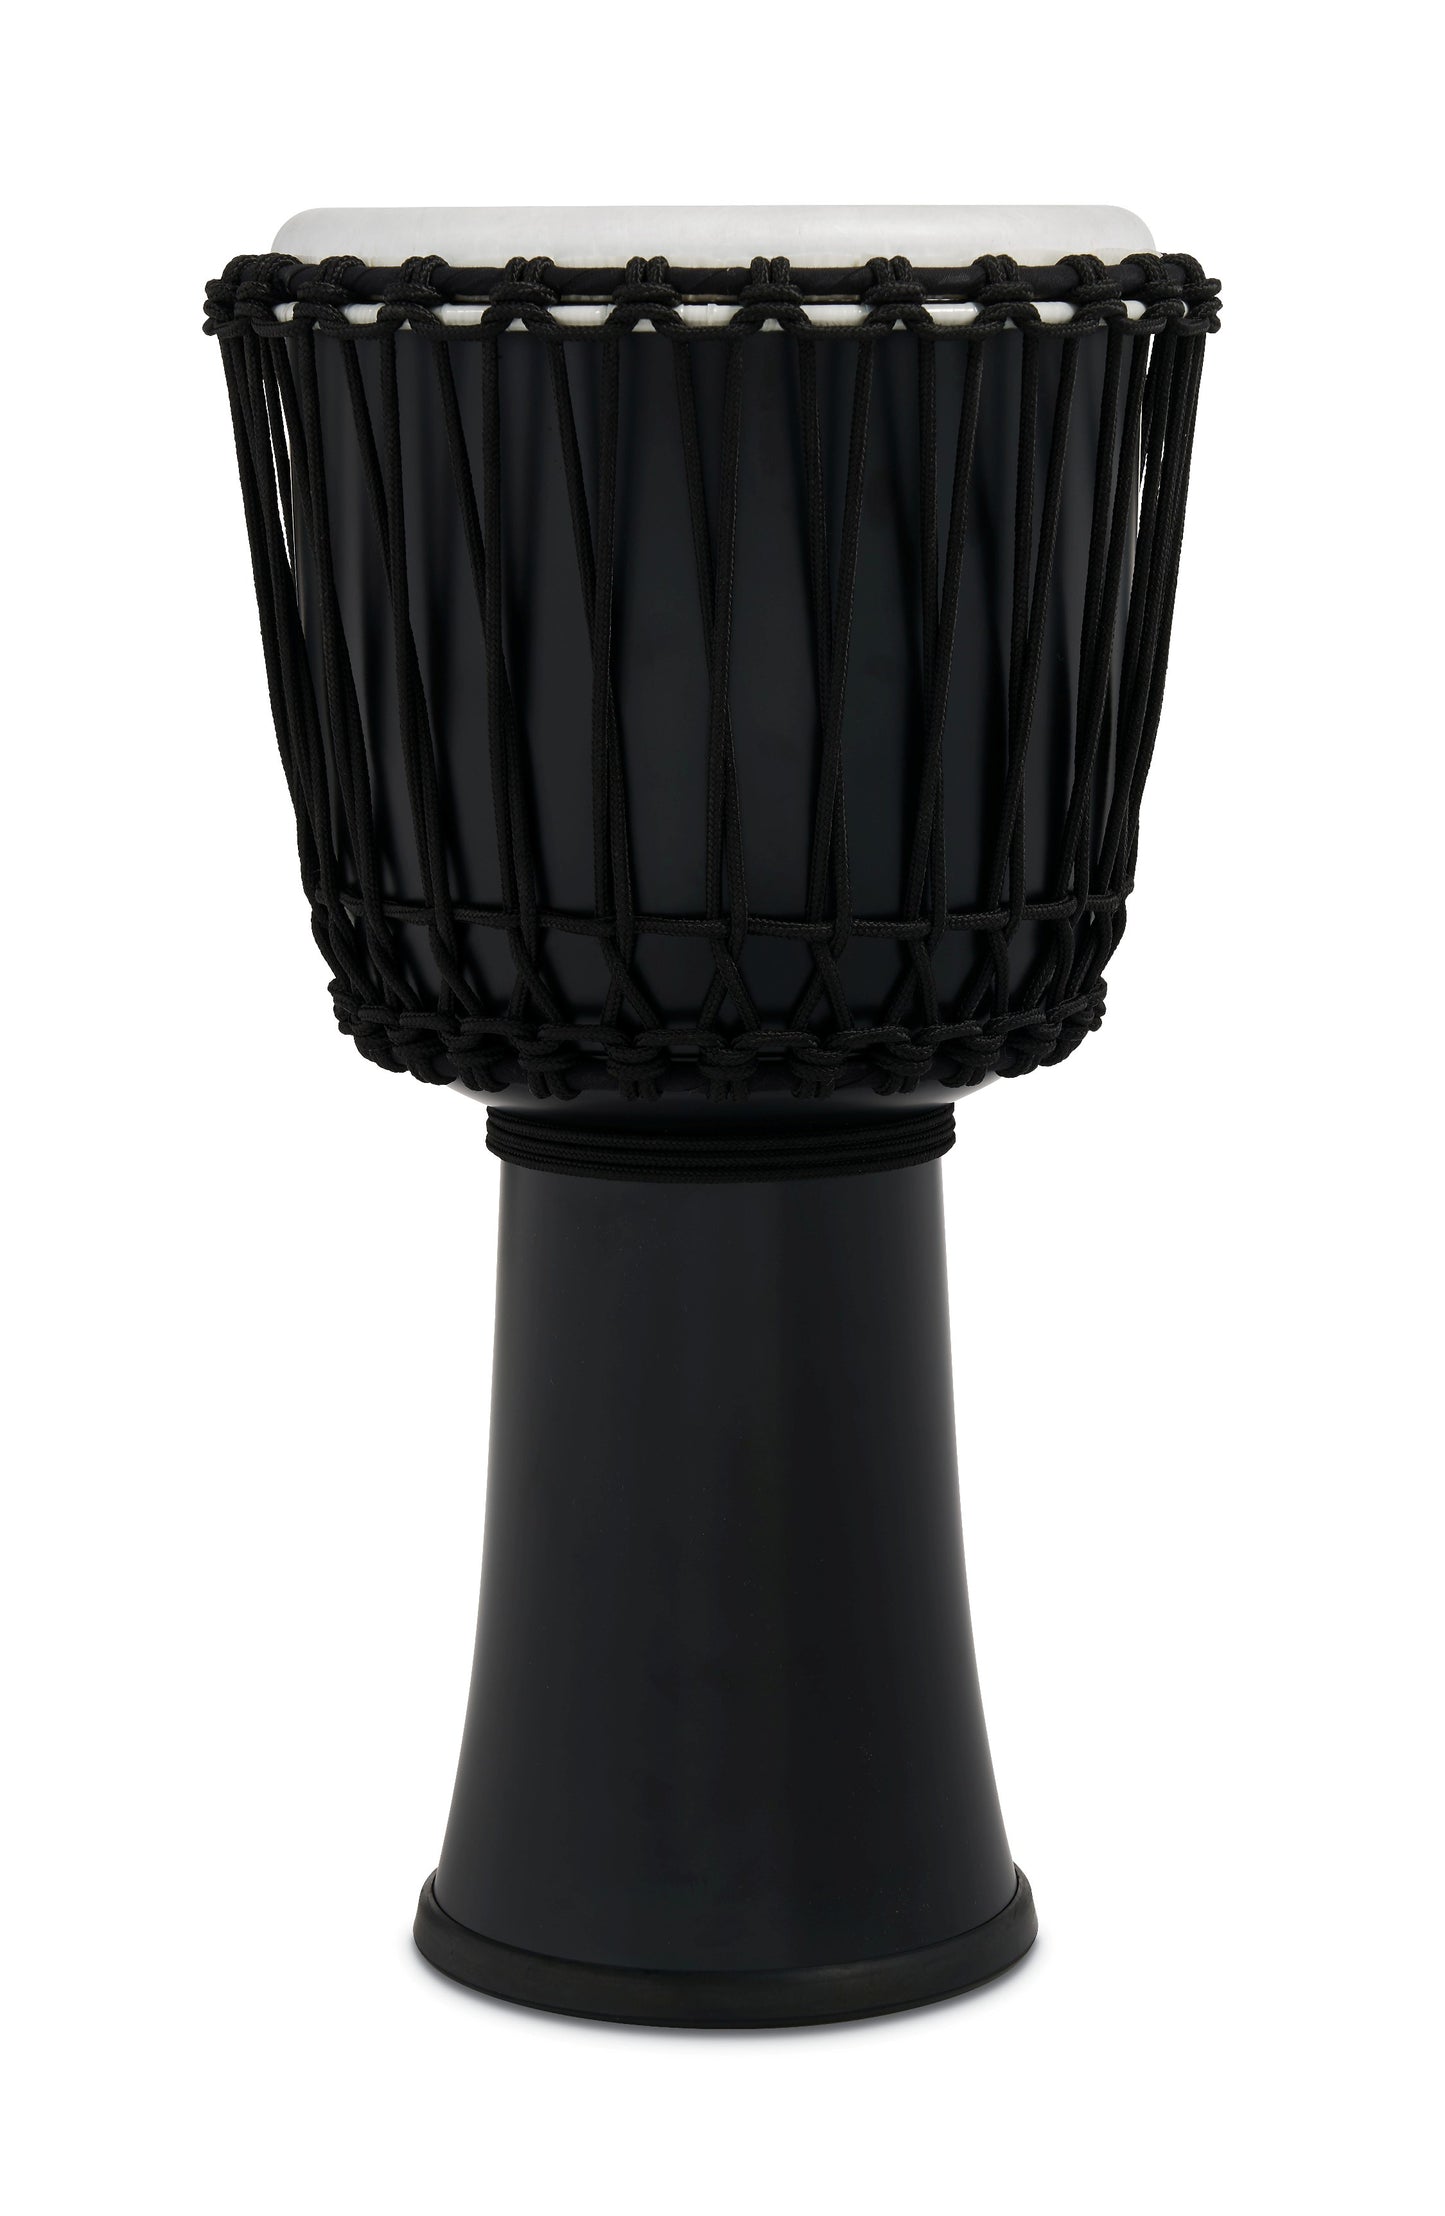 Latin Percussion 10-inch Rope Tuned Circle Djembe with Perfect-Pitch head - Black - LP2010-BK - Poppa's Music 